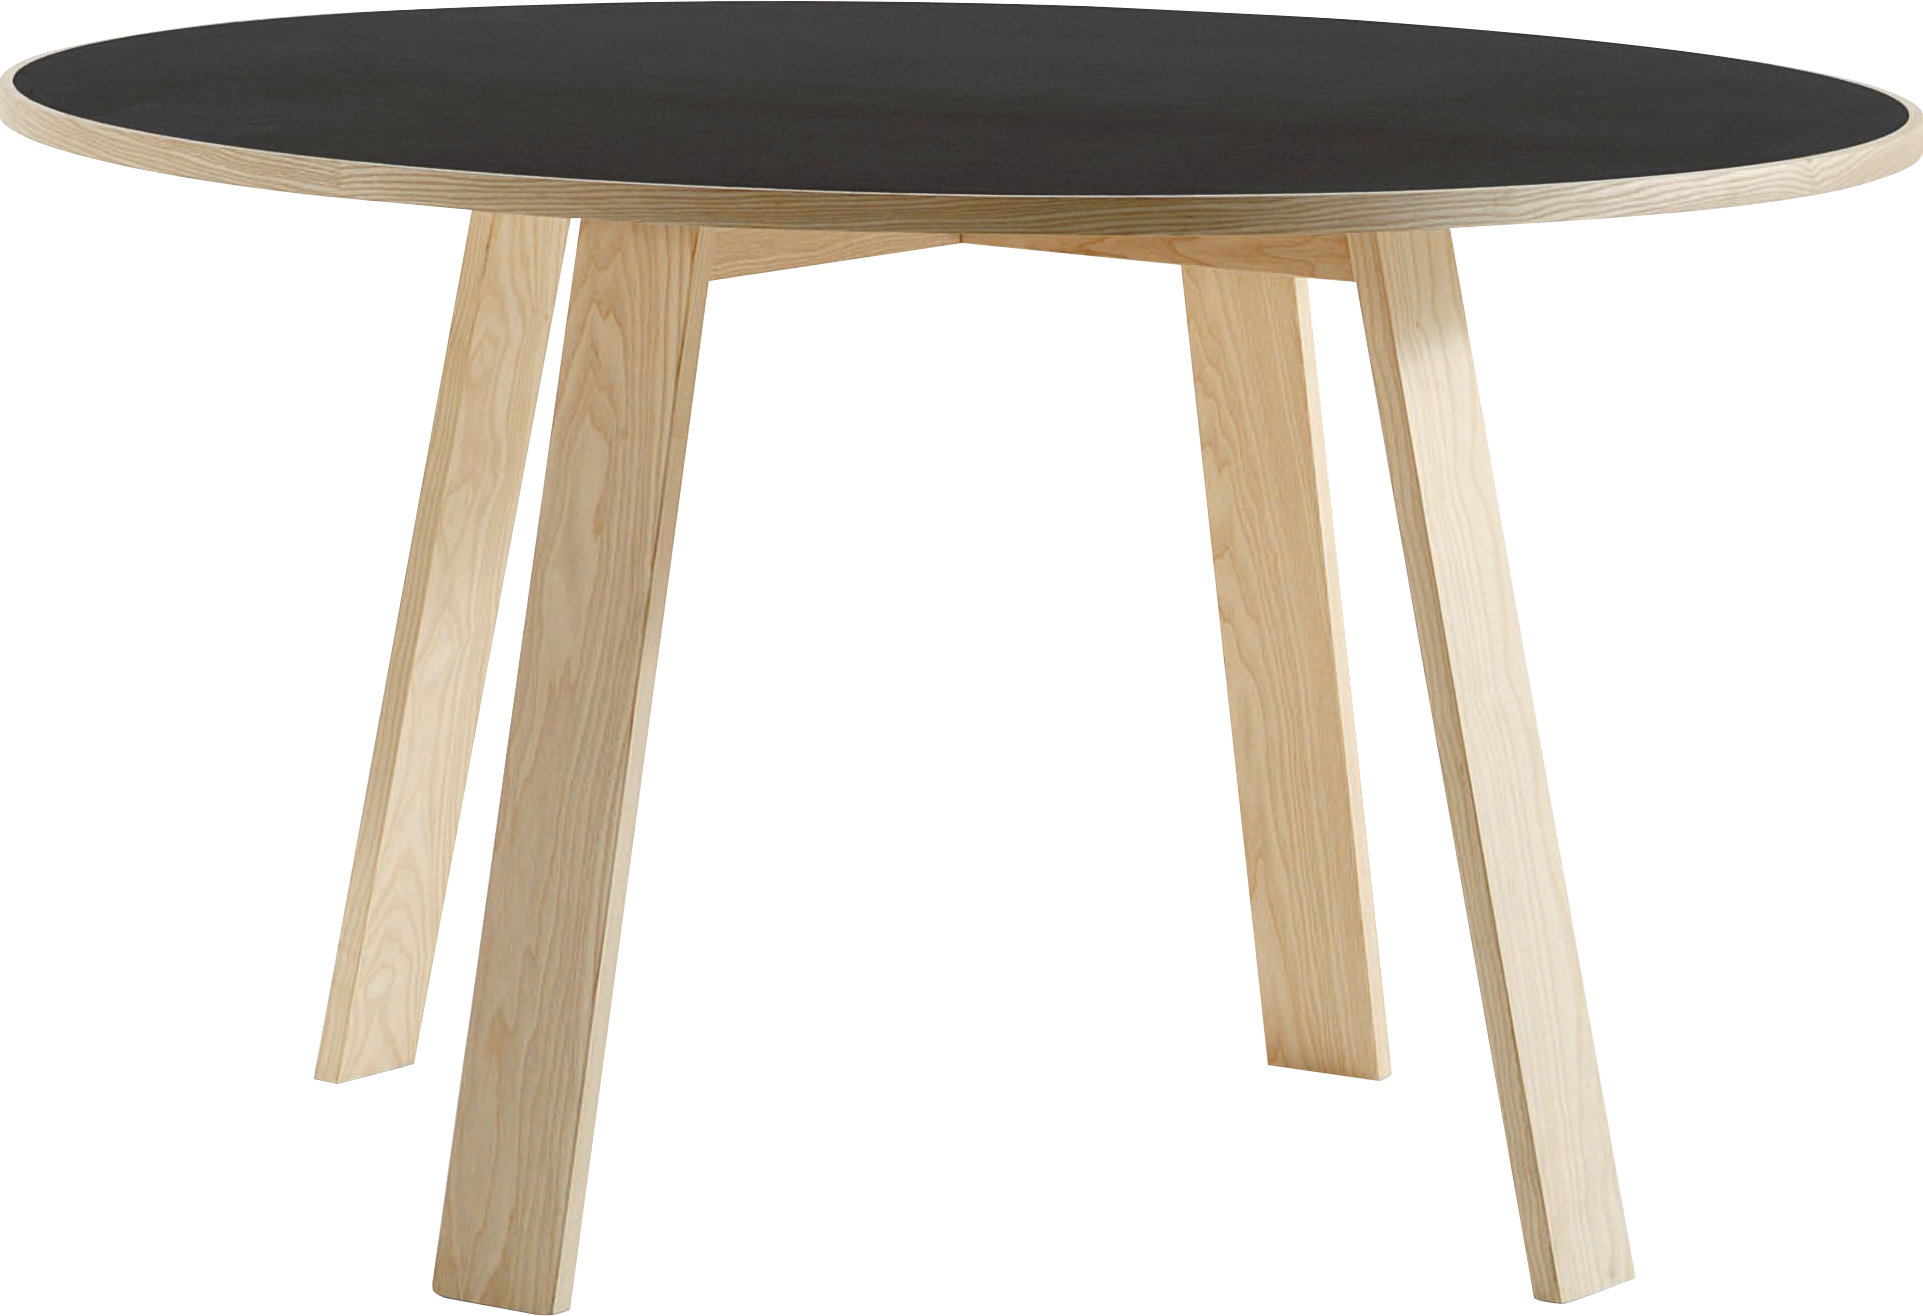 Transparent Side Tables For Living Rooms Within Latest Table Png Image Transparent Image Download, Size: 1923x1316px (View 7 of 15)